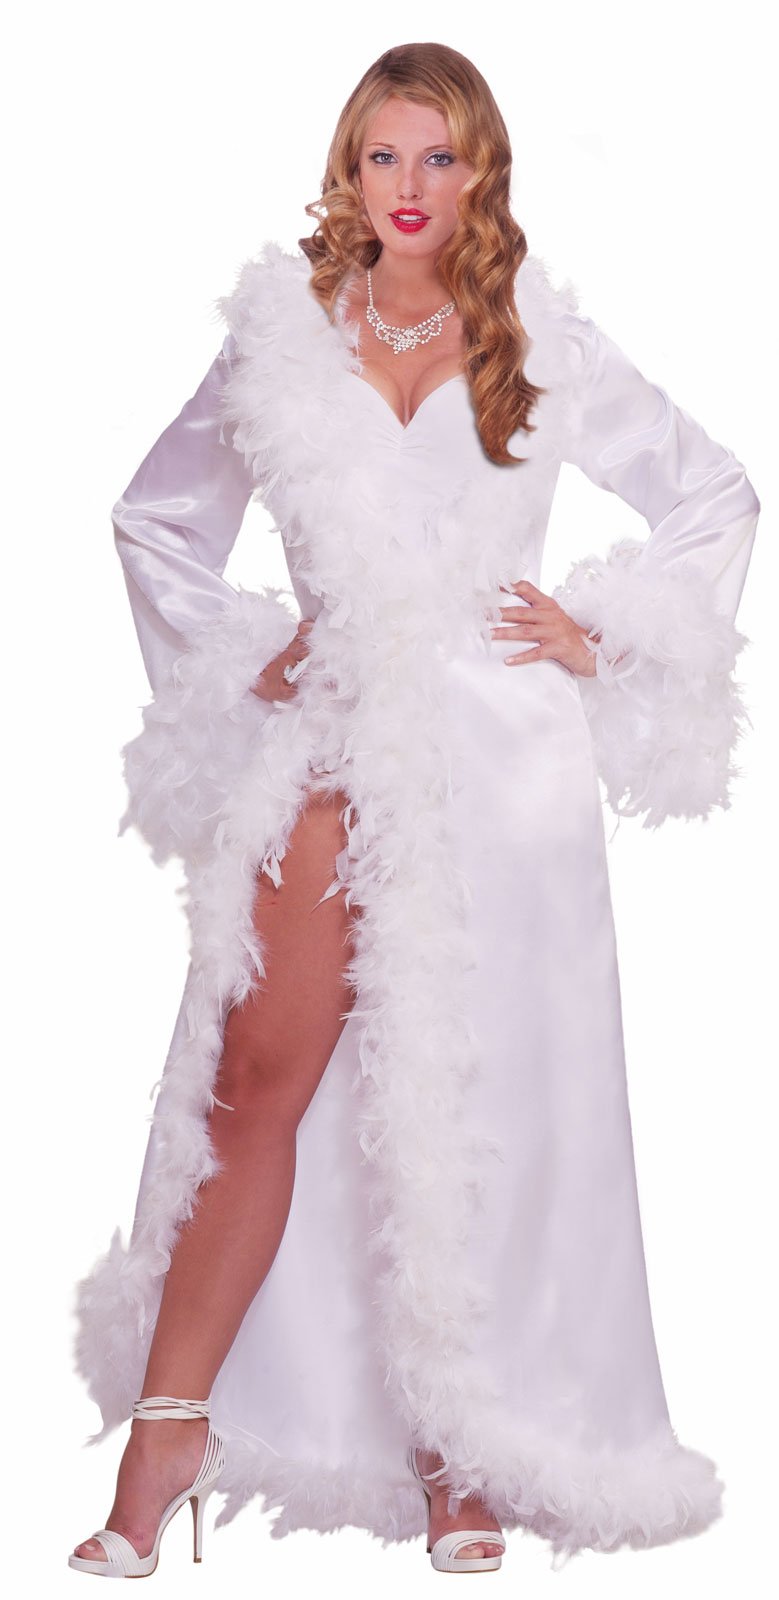 Vintage Hollywood Marabou Satin Robe Adult Costume - Click Image to Close